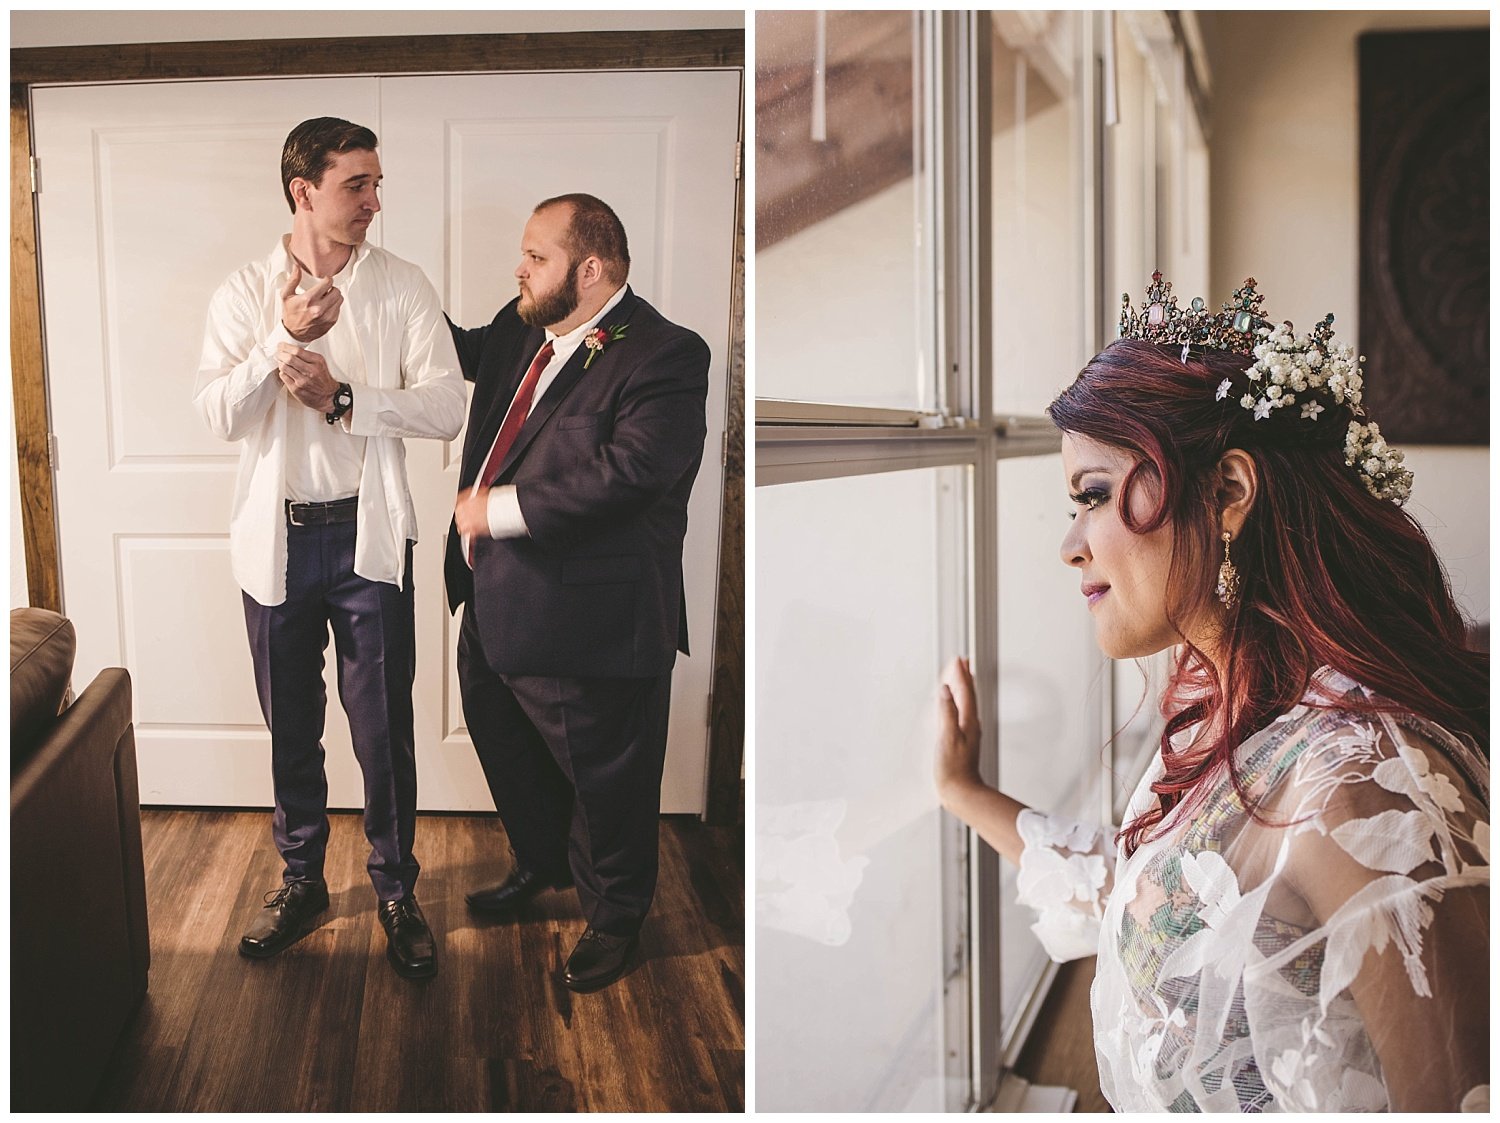  Prepare to enter the whimsical world of Christopher and Melanie's renaissance-themed wedding at The Sterling Venue in Minneola, FL. 